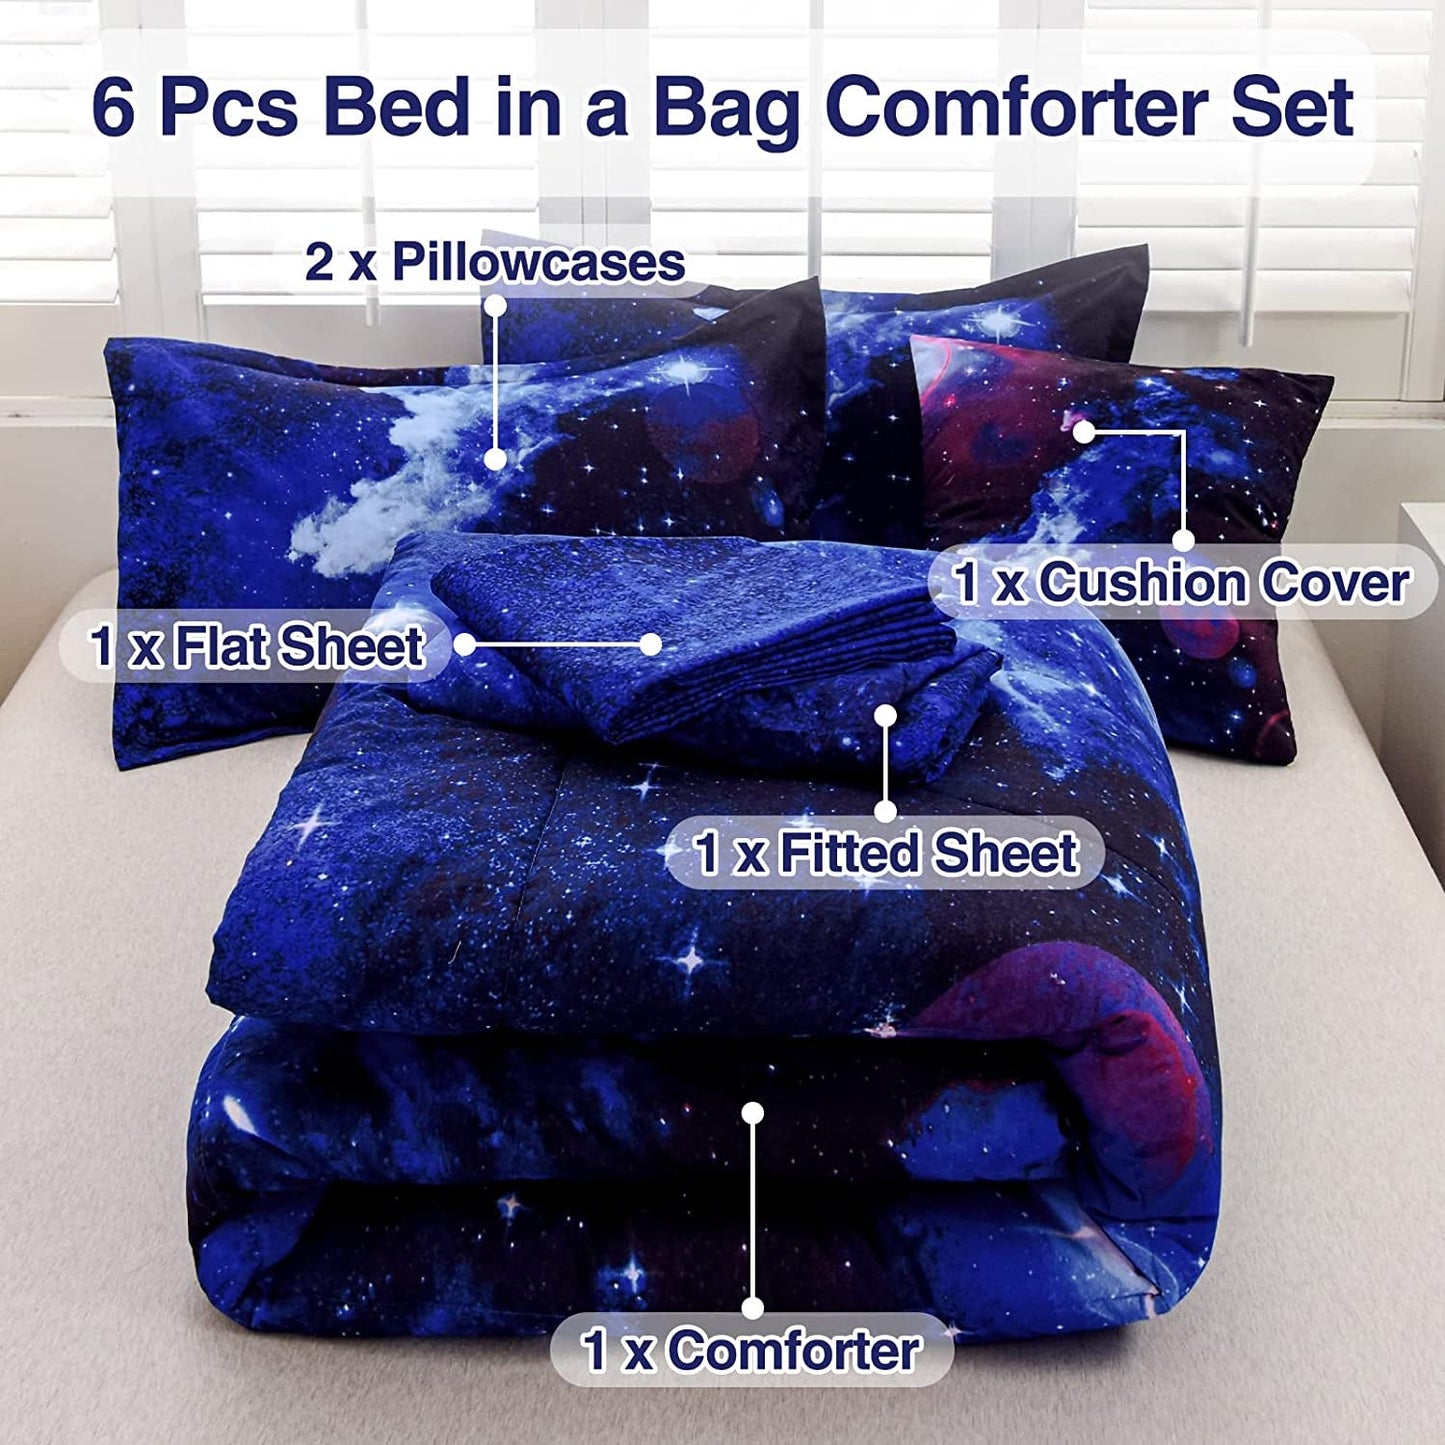 A Nice Night Galaxy 6Pcs Bedding Sets Outer Space Comforter Bed in a Bag 3D Printed Quilt,For Children Boy Girl Teen Kids,Twin 6Pcs